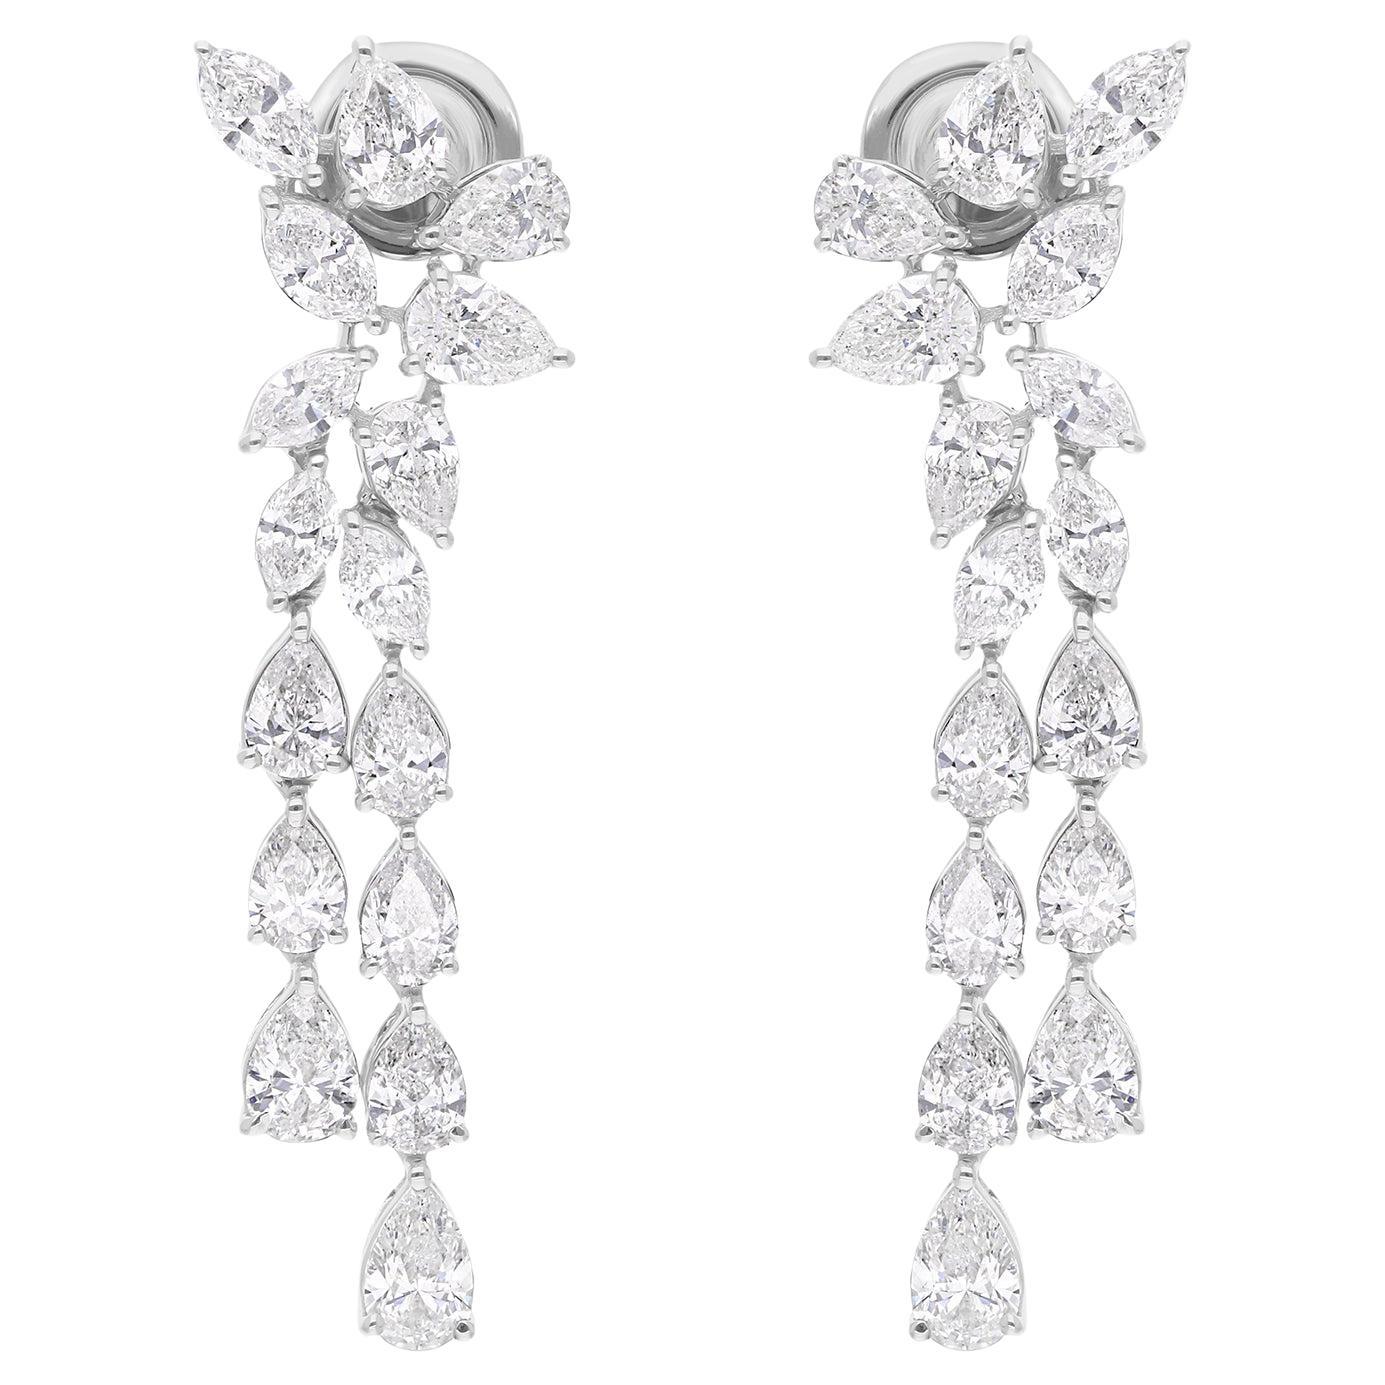 Natural 5.18 Carat Pear & Marquise Diamond Earrings 18 Karat White Gold Jewelry For Sale